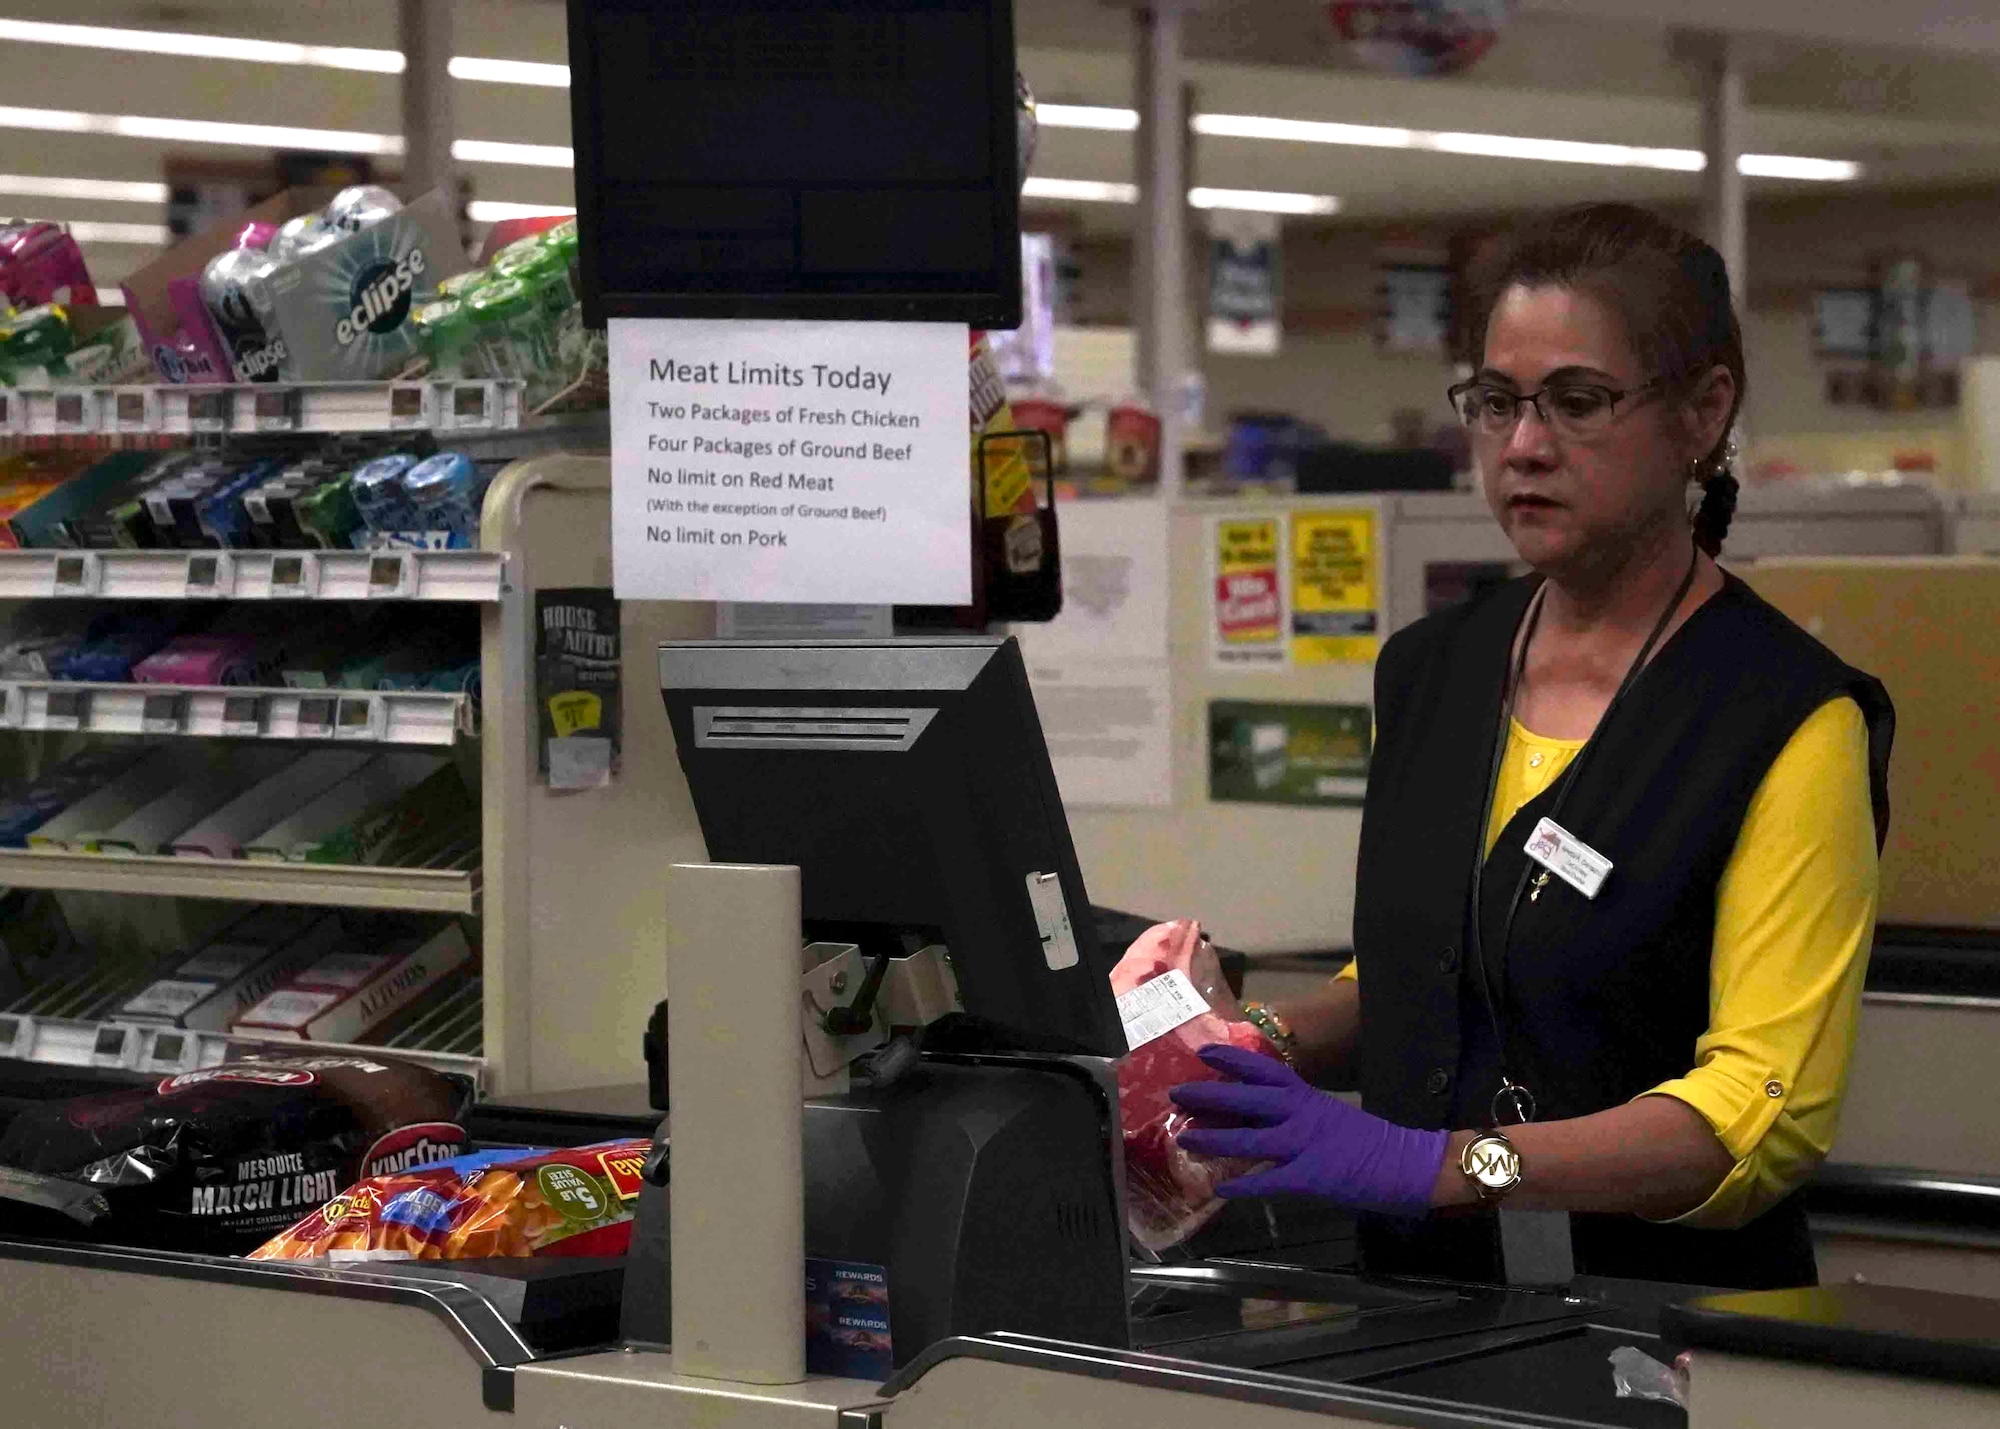 Amelia Camacho, a Defense Commissary Agency cashier, scans items at the commissary on Nellis Air Force Base, Nevada, March 24, 2020. Commissary workers continue to serve customers amid the COVID-19 pandemic while using personal protective equipment, such as gloves and face masks. (U.S. Air Force photo by Senior Airman Stephanie Gelardo)